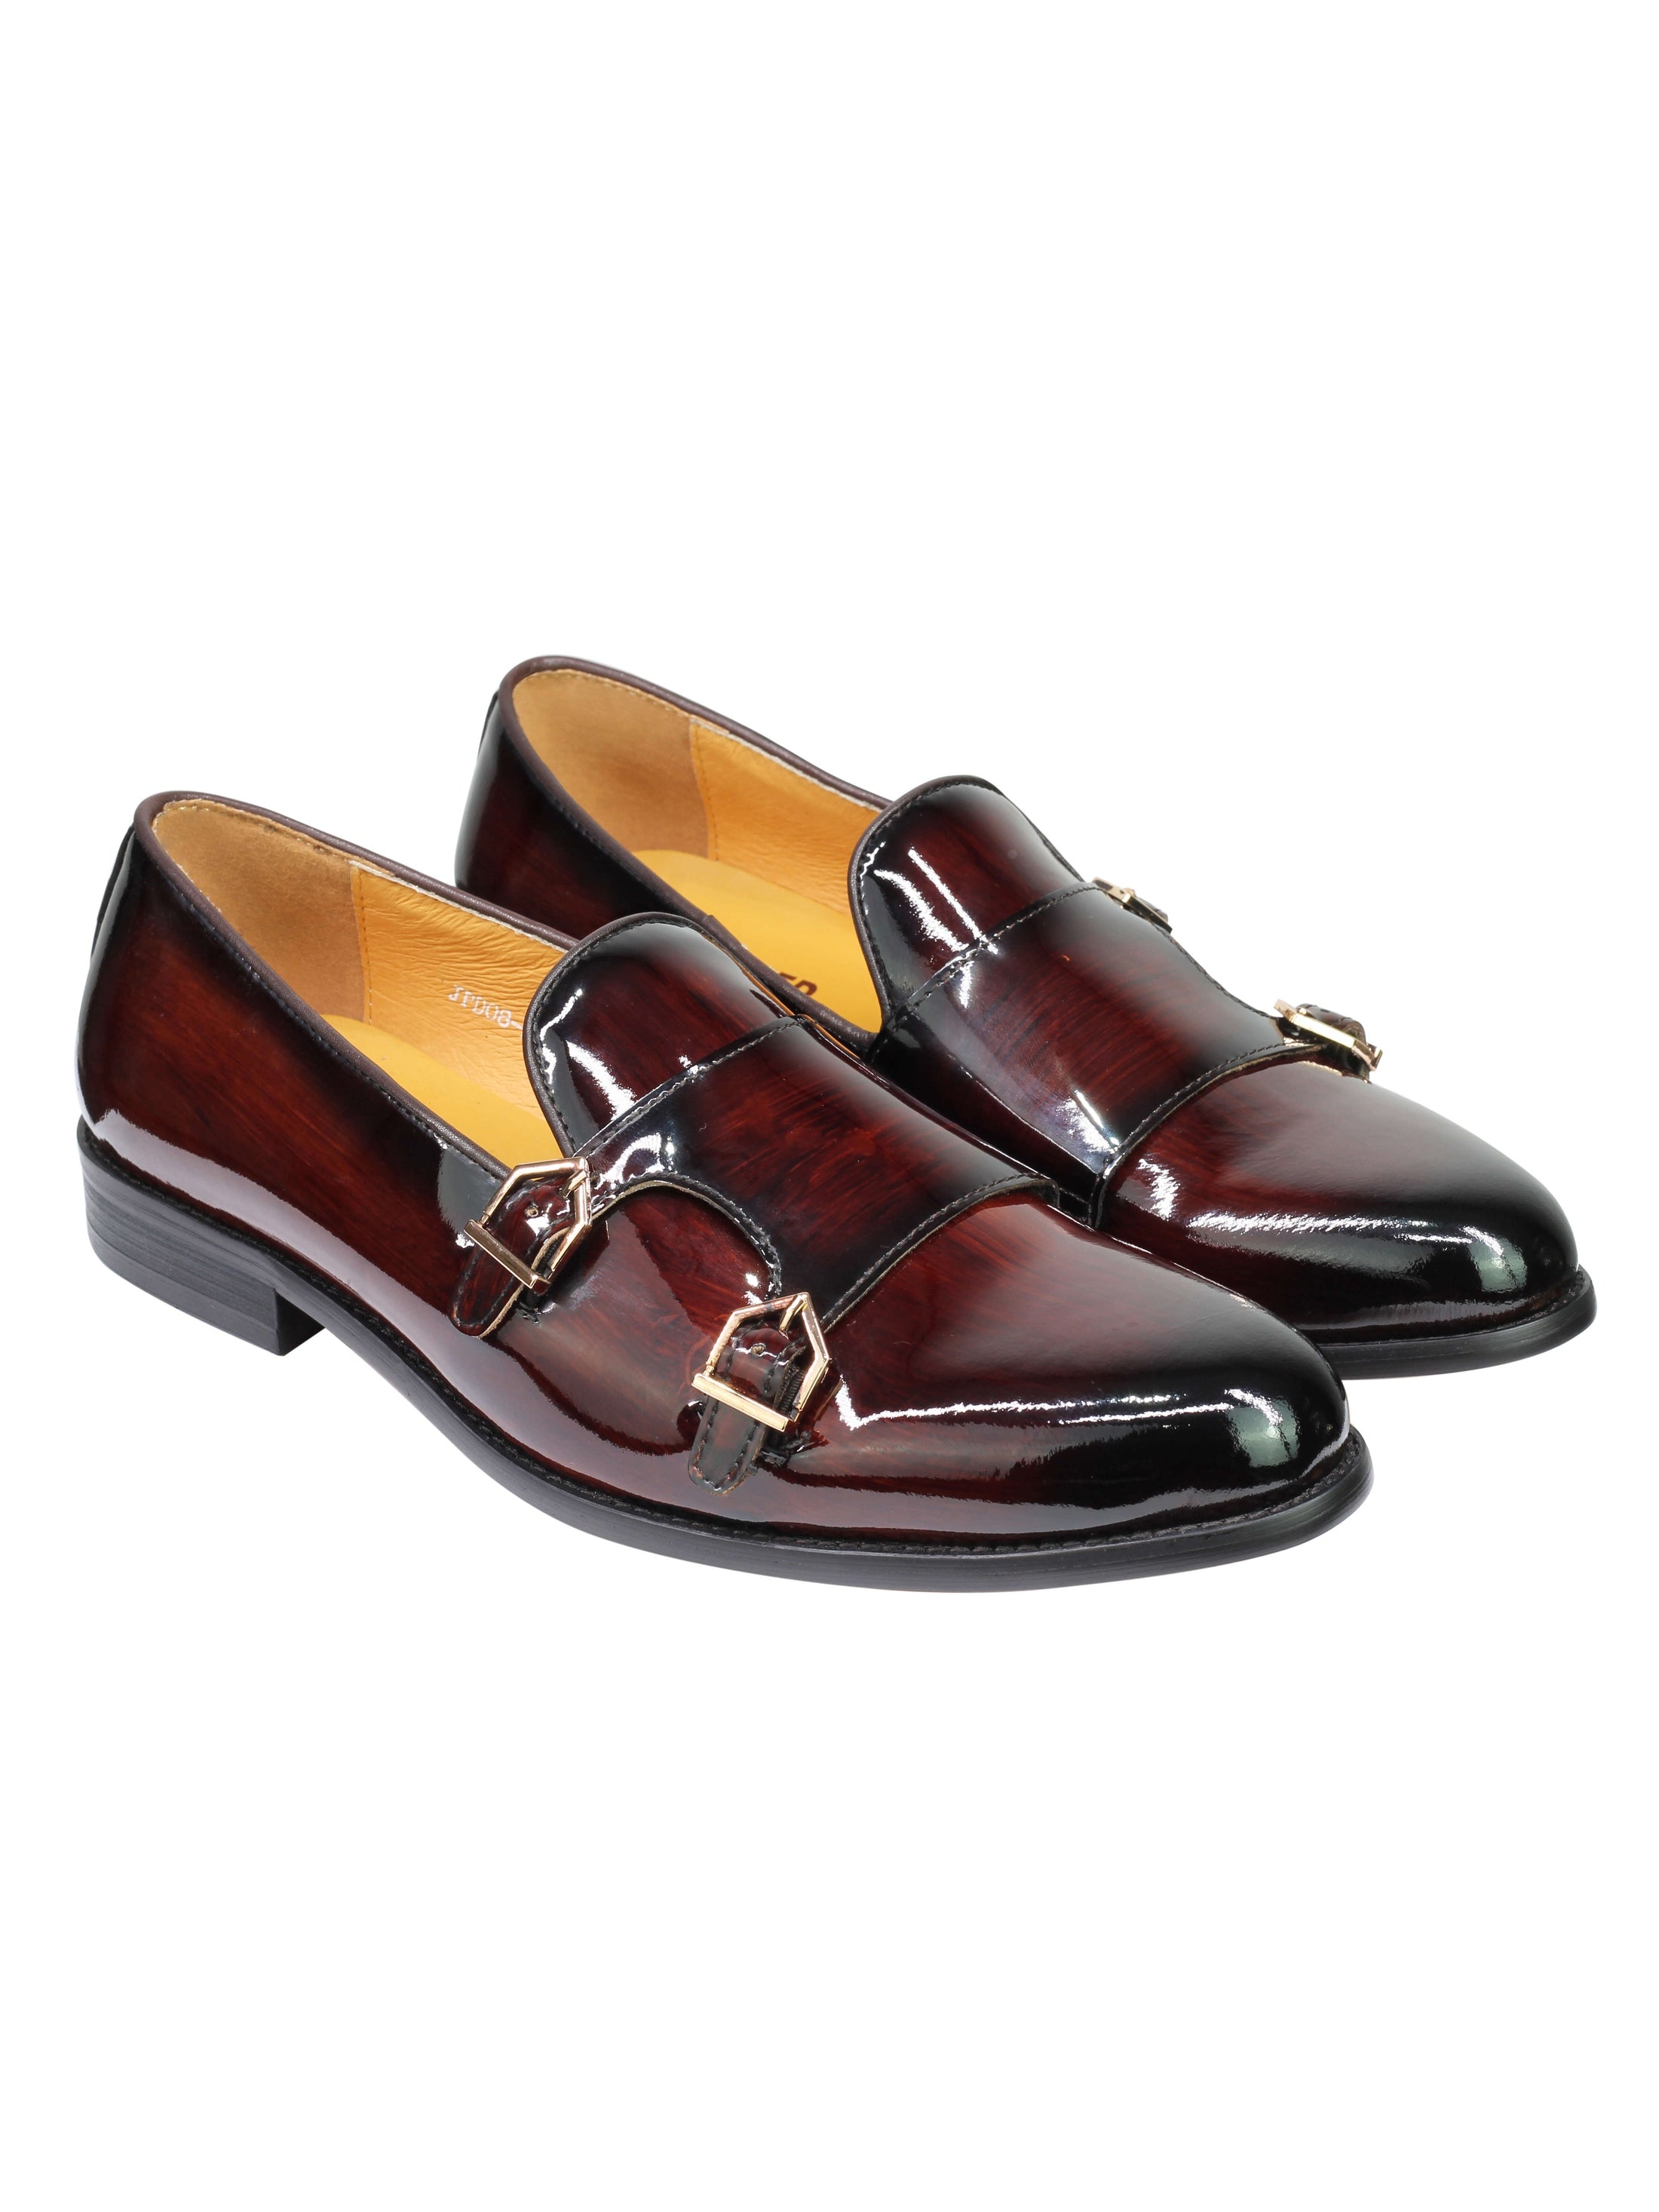 Real Leather Patent Tassel Shiny Loafers